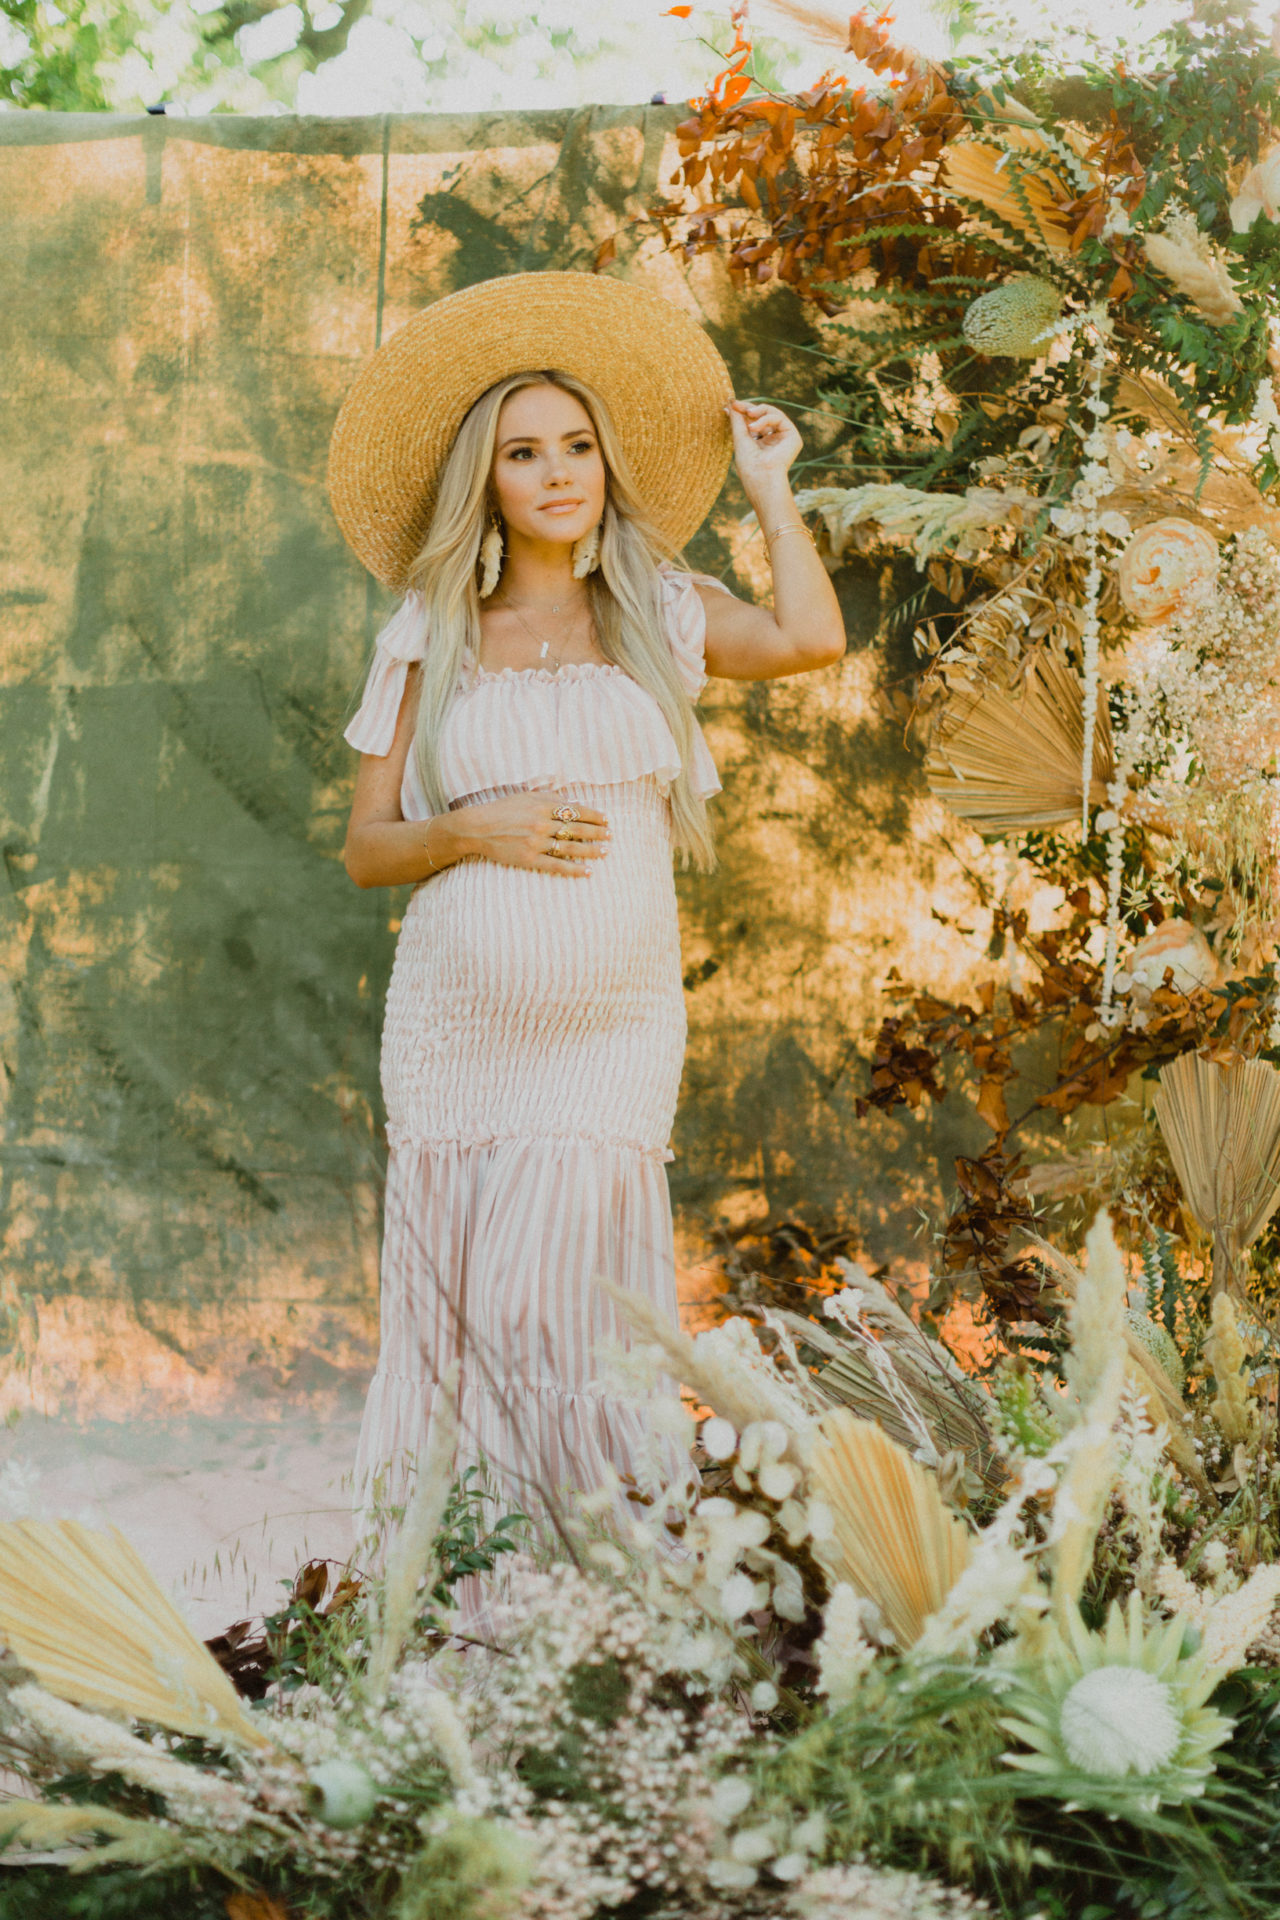 glowing maternity shoot with wild flowers and sun hat